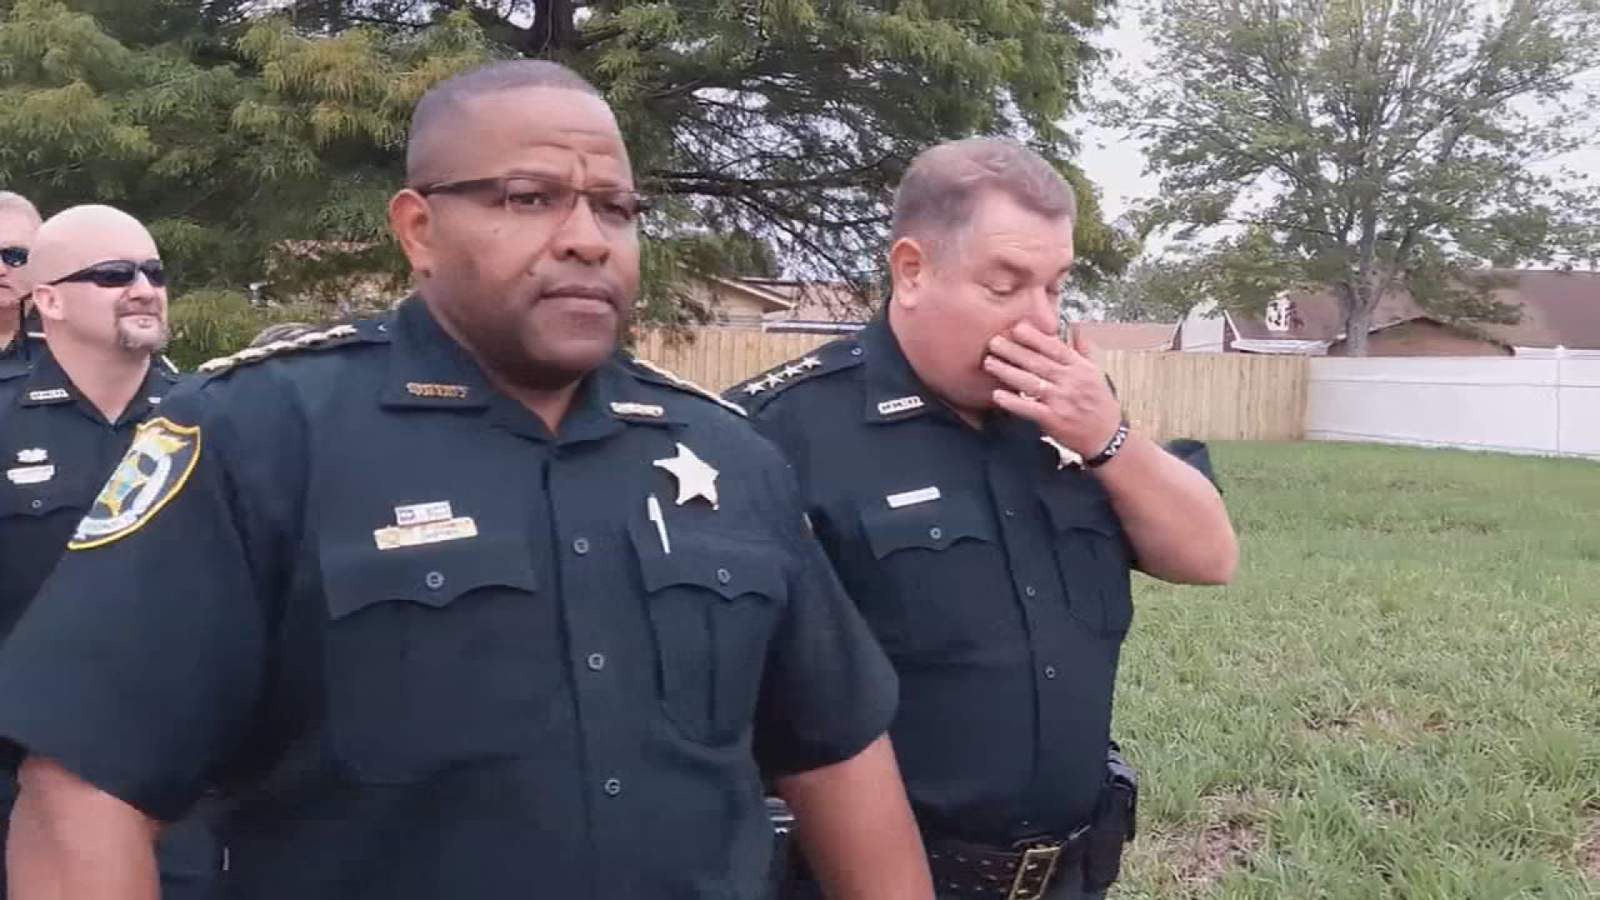 Sheriff Darryl Daniels has been given until end of the day to resign or be arrested